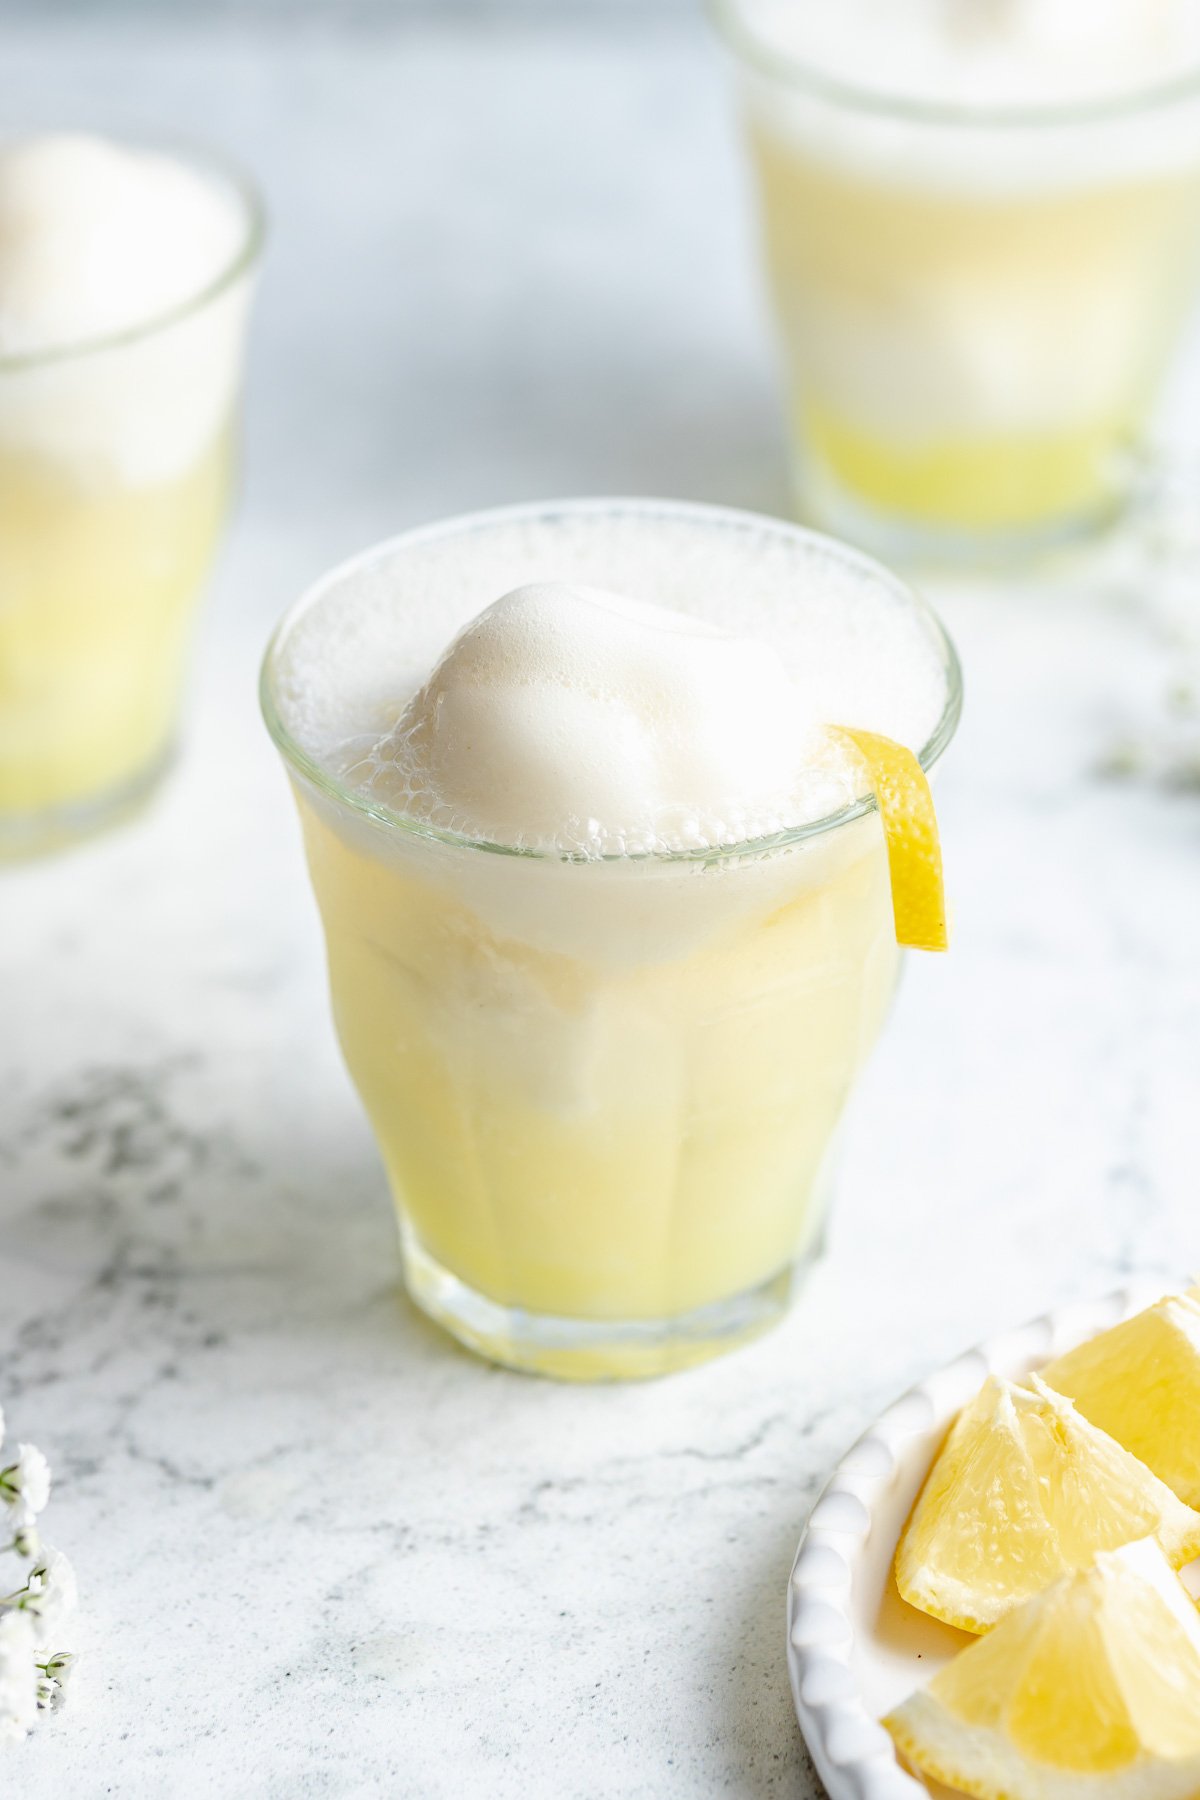 https://playswellwithbutter.com/wp-content/uploads/2021/06/Sgroppino-Cocktail-Limoncello-Prosecco-Floats-4.jpg